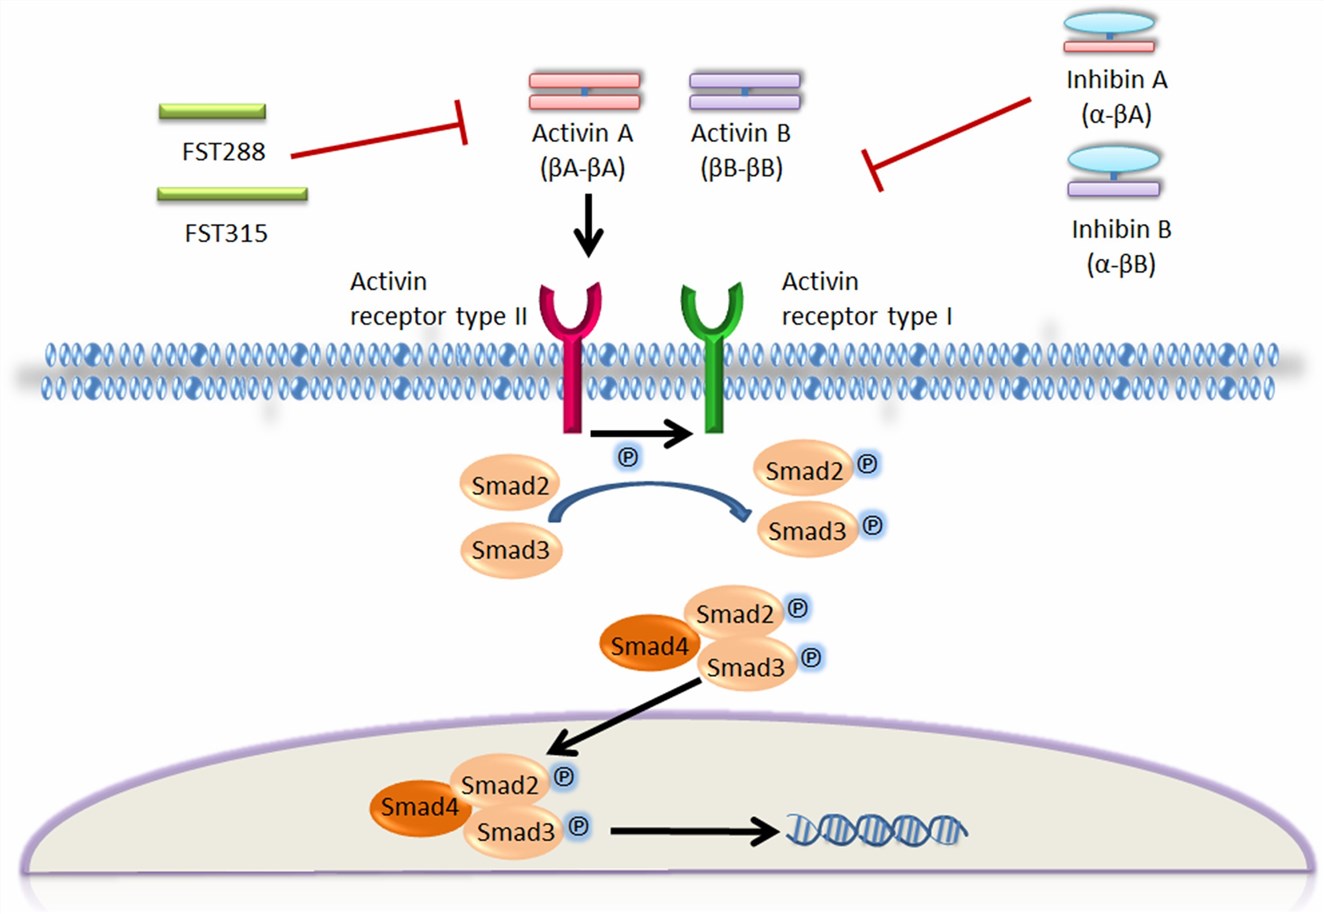 The activin signalling pathway.